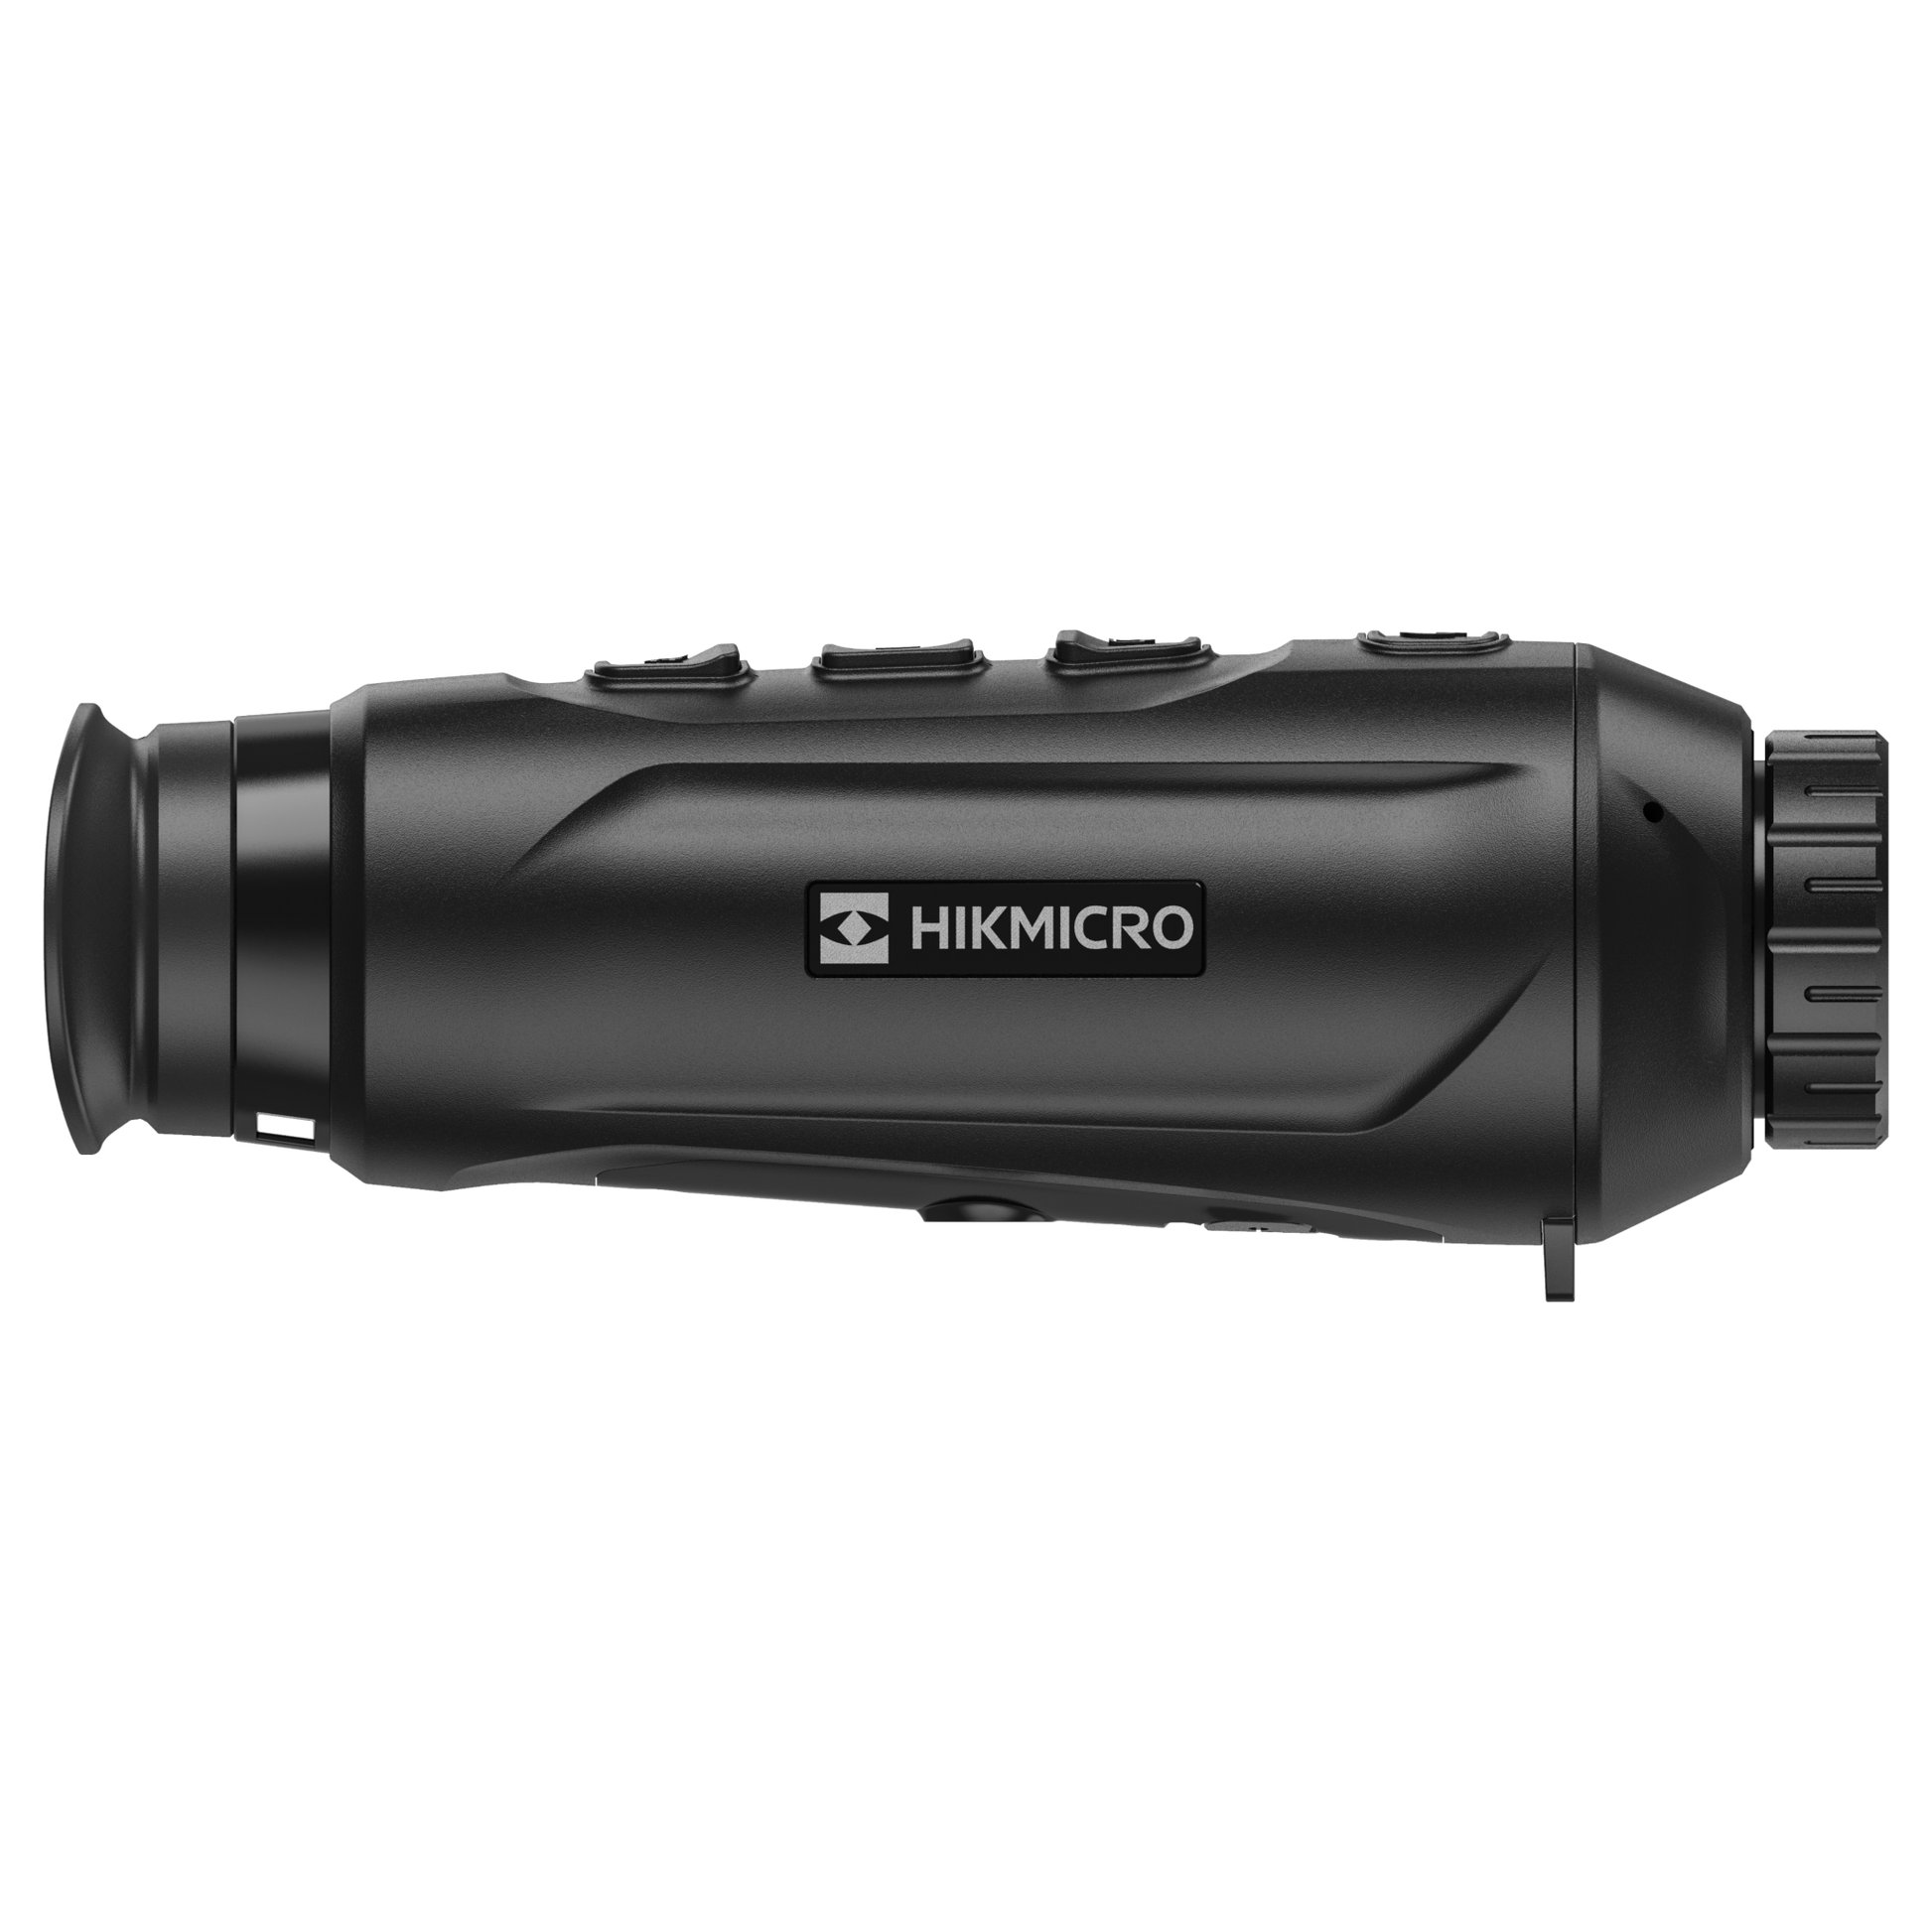 HikMicro Lynx LH25 2.0 Monocular right side view